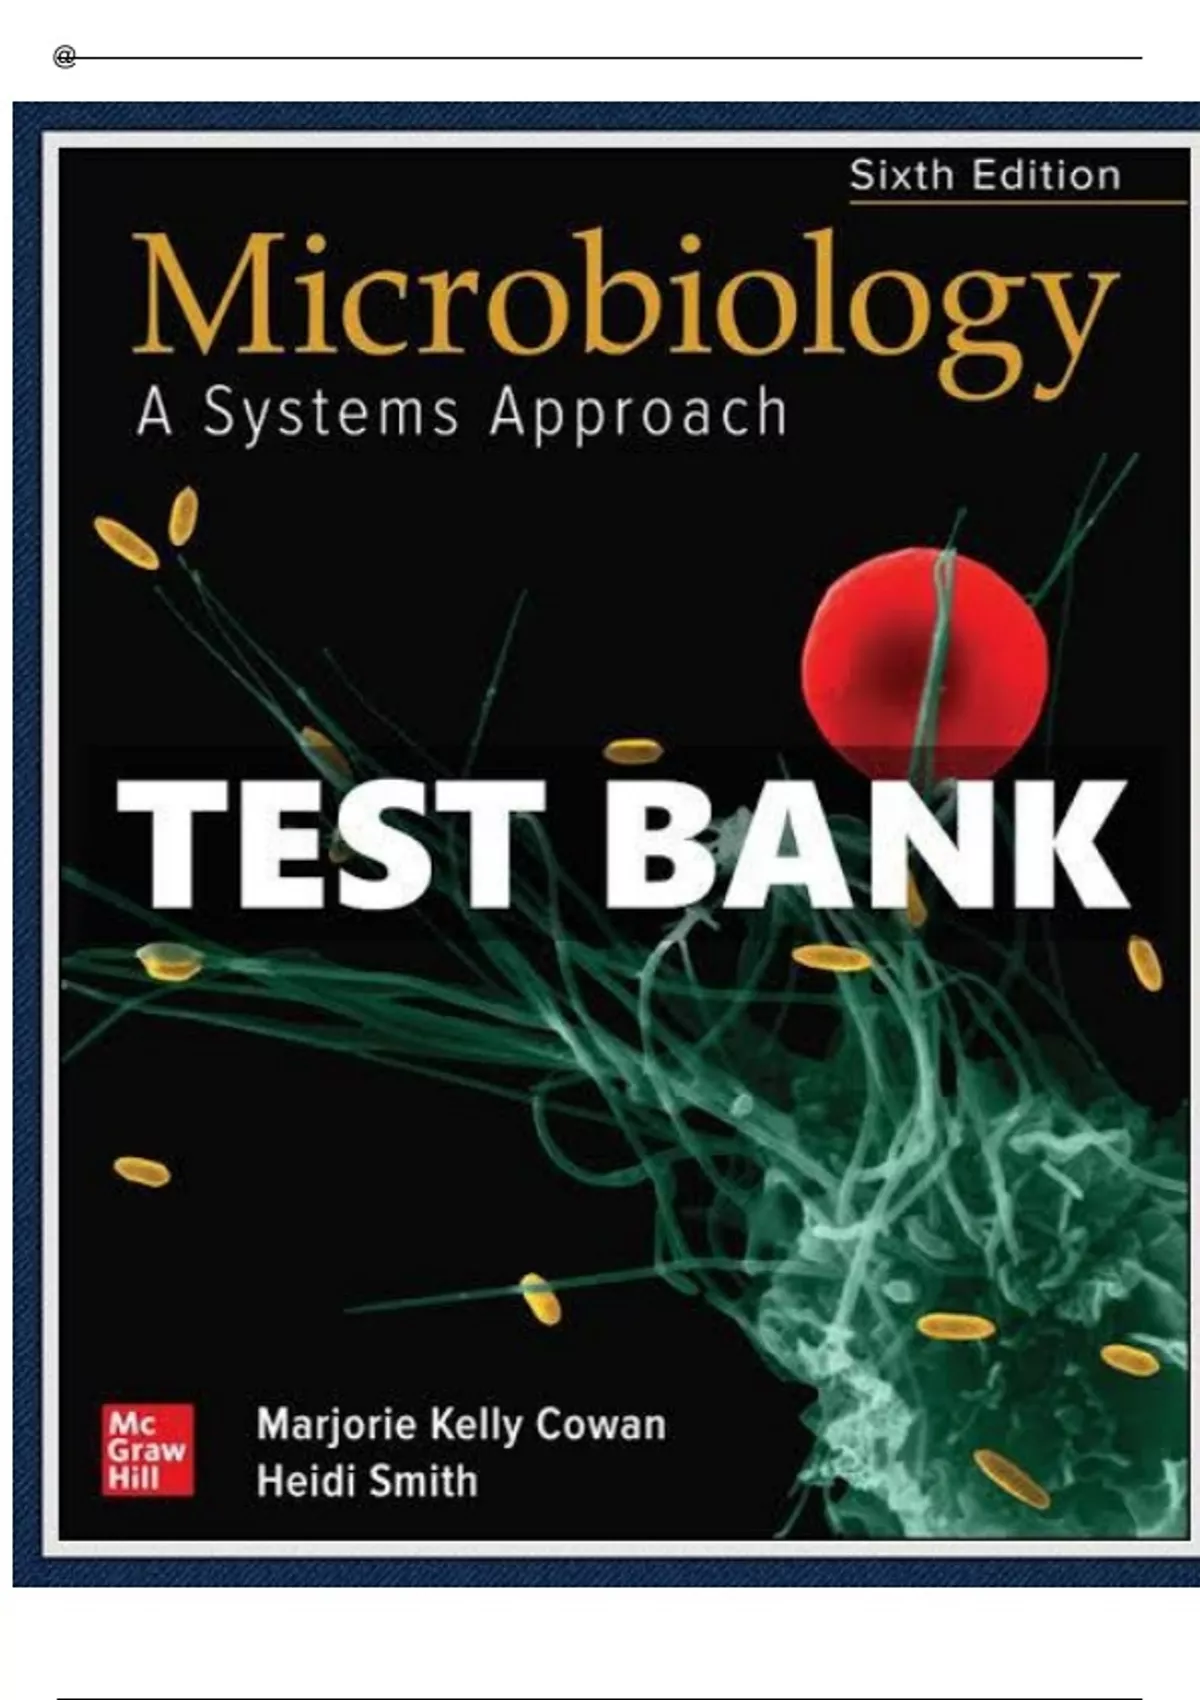 Test Bank For Microbiology A Systems Approach 6th Edition Marjorie Kelly Cowan Heidi Smith 